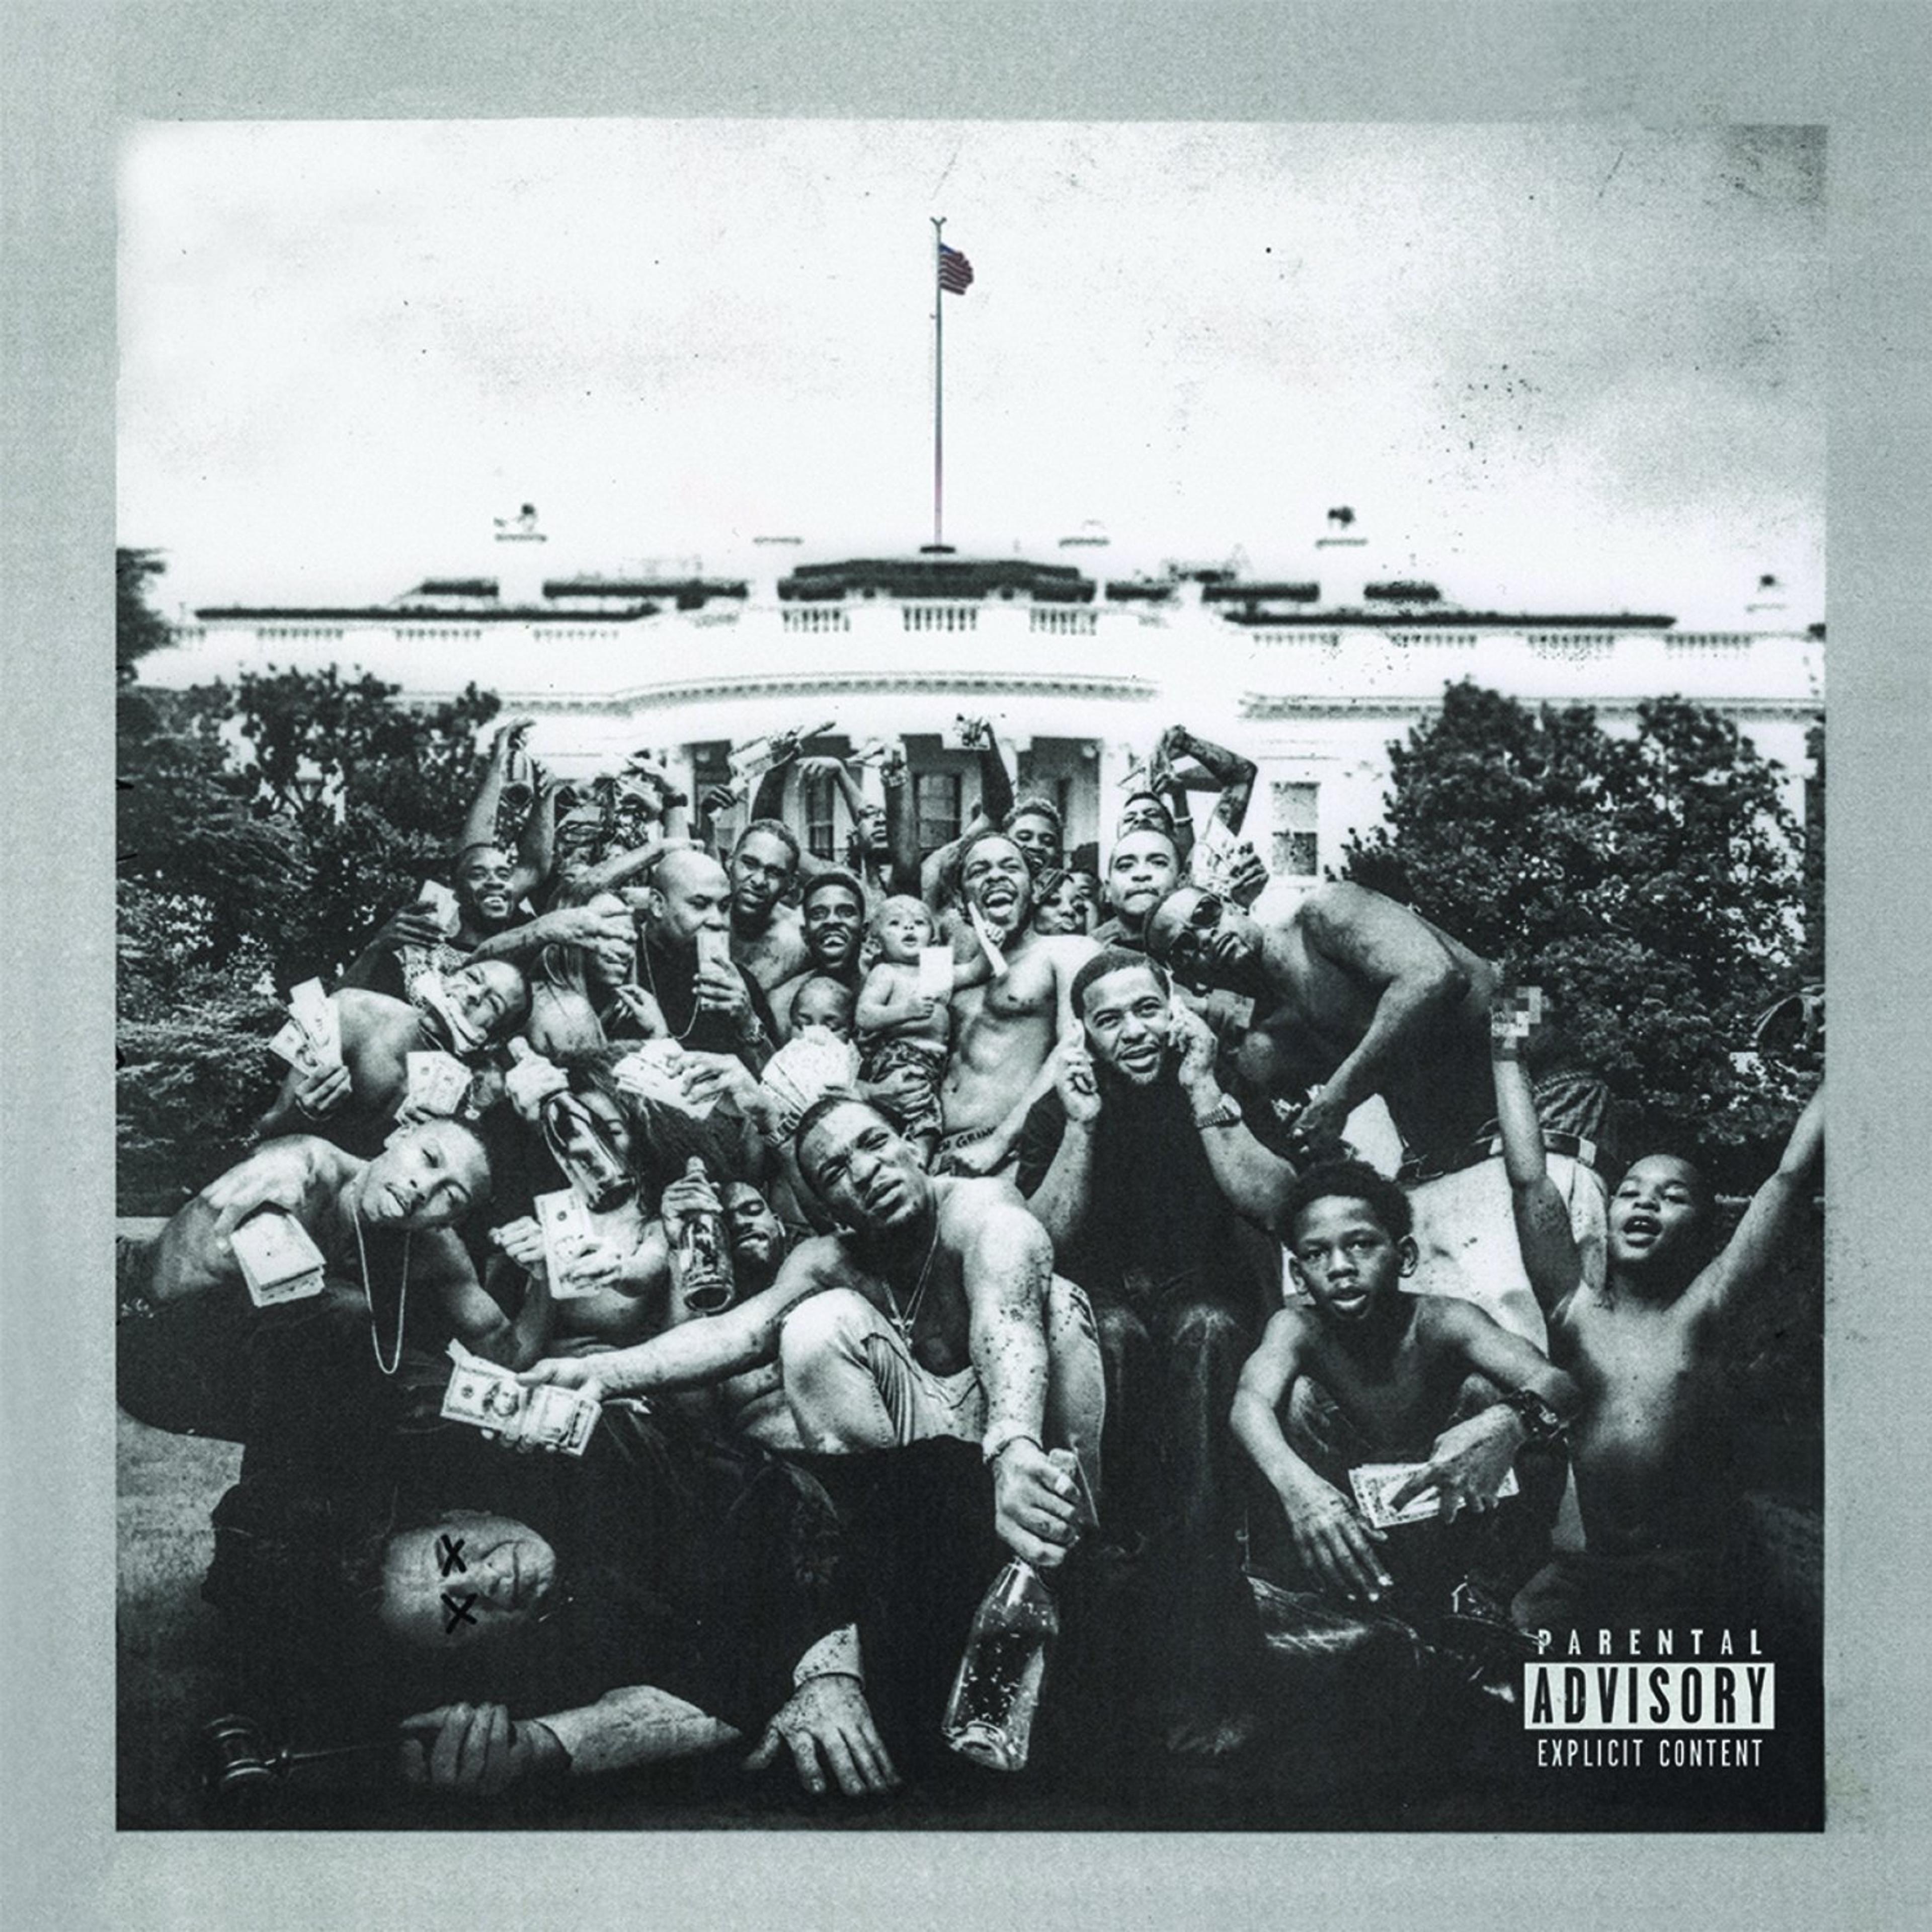 Explore Kendrick Lamar's "To Pimp a Butterfly" - its innovative storytelling, lyrics, and production make it the best album of all time.